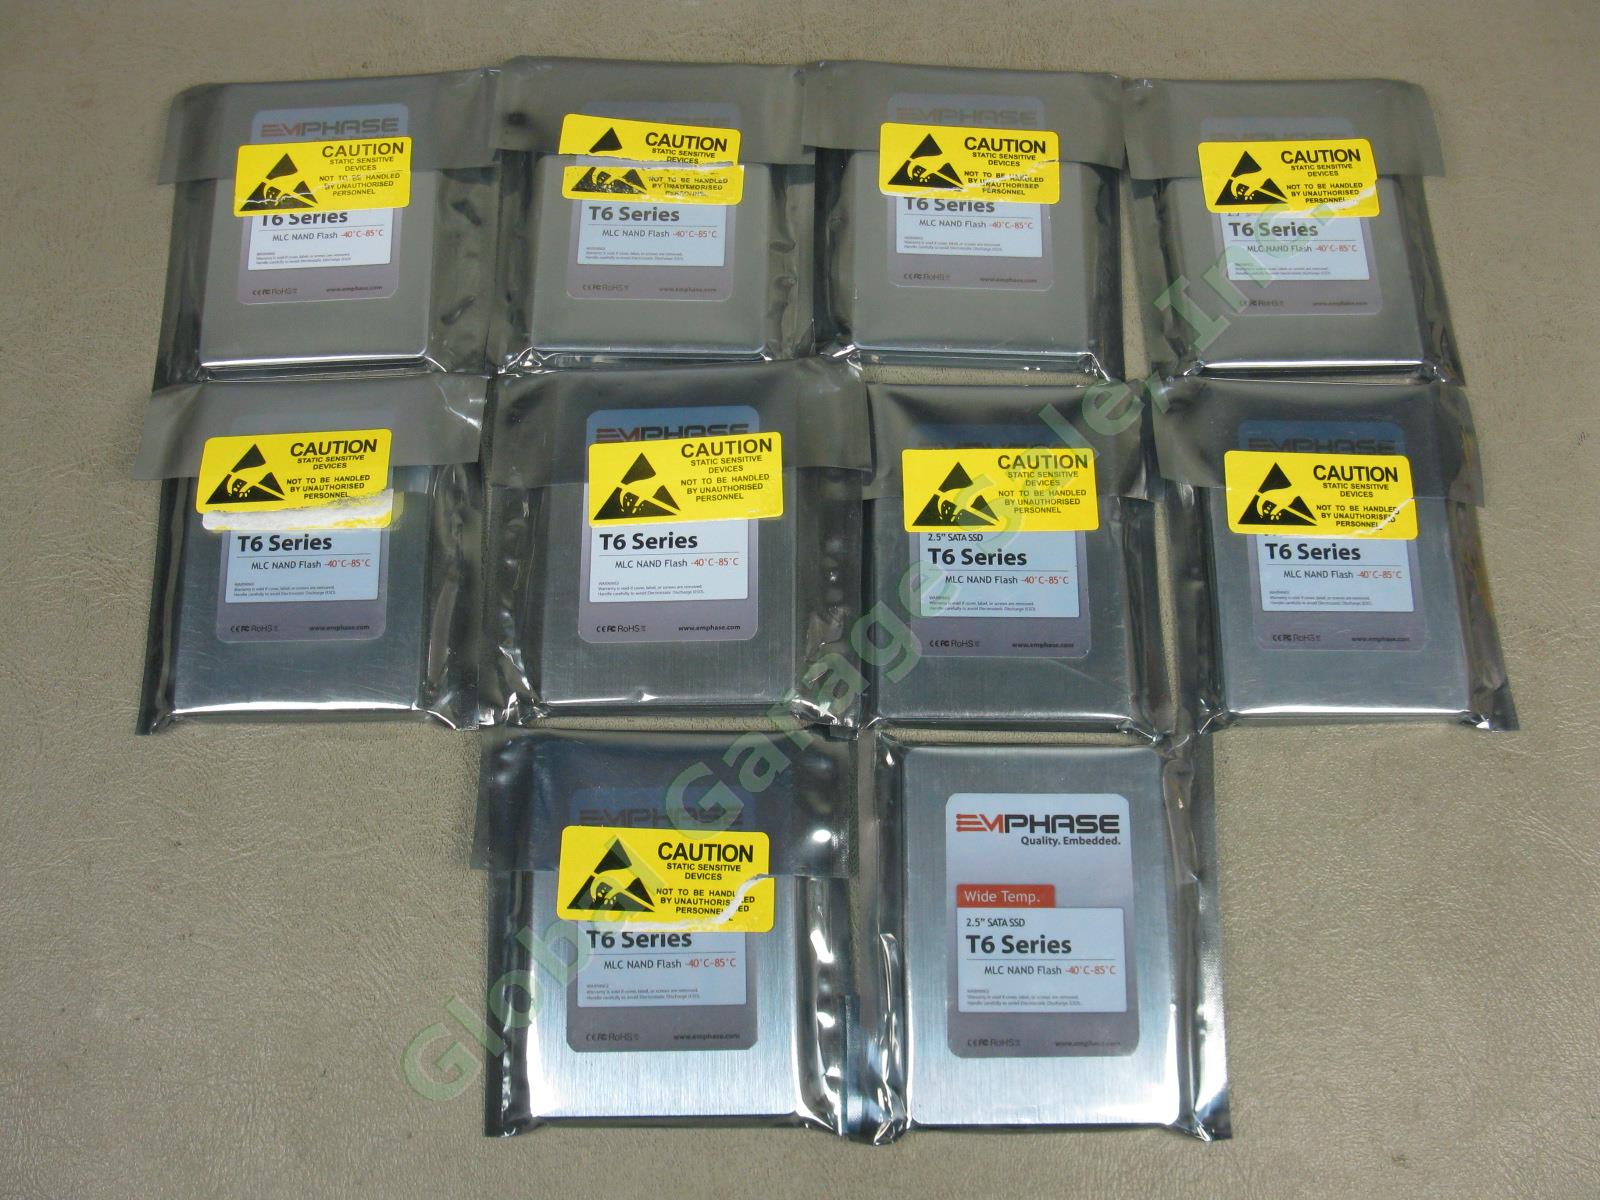 60 NEW Emphase T6 2.5" MLC NAND 60GB SSD Industrial Wide Temperature HDD Lot